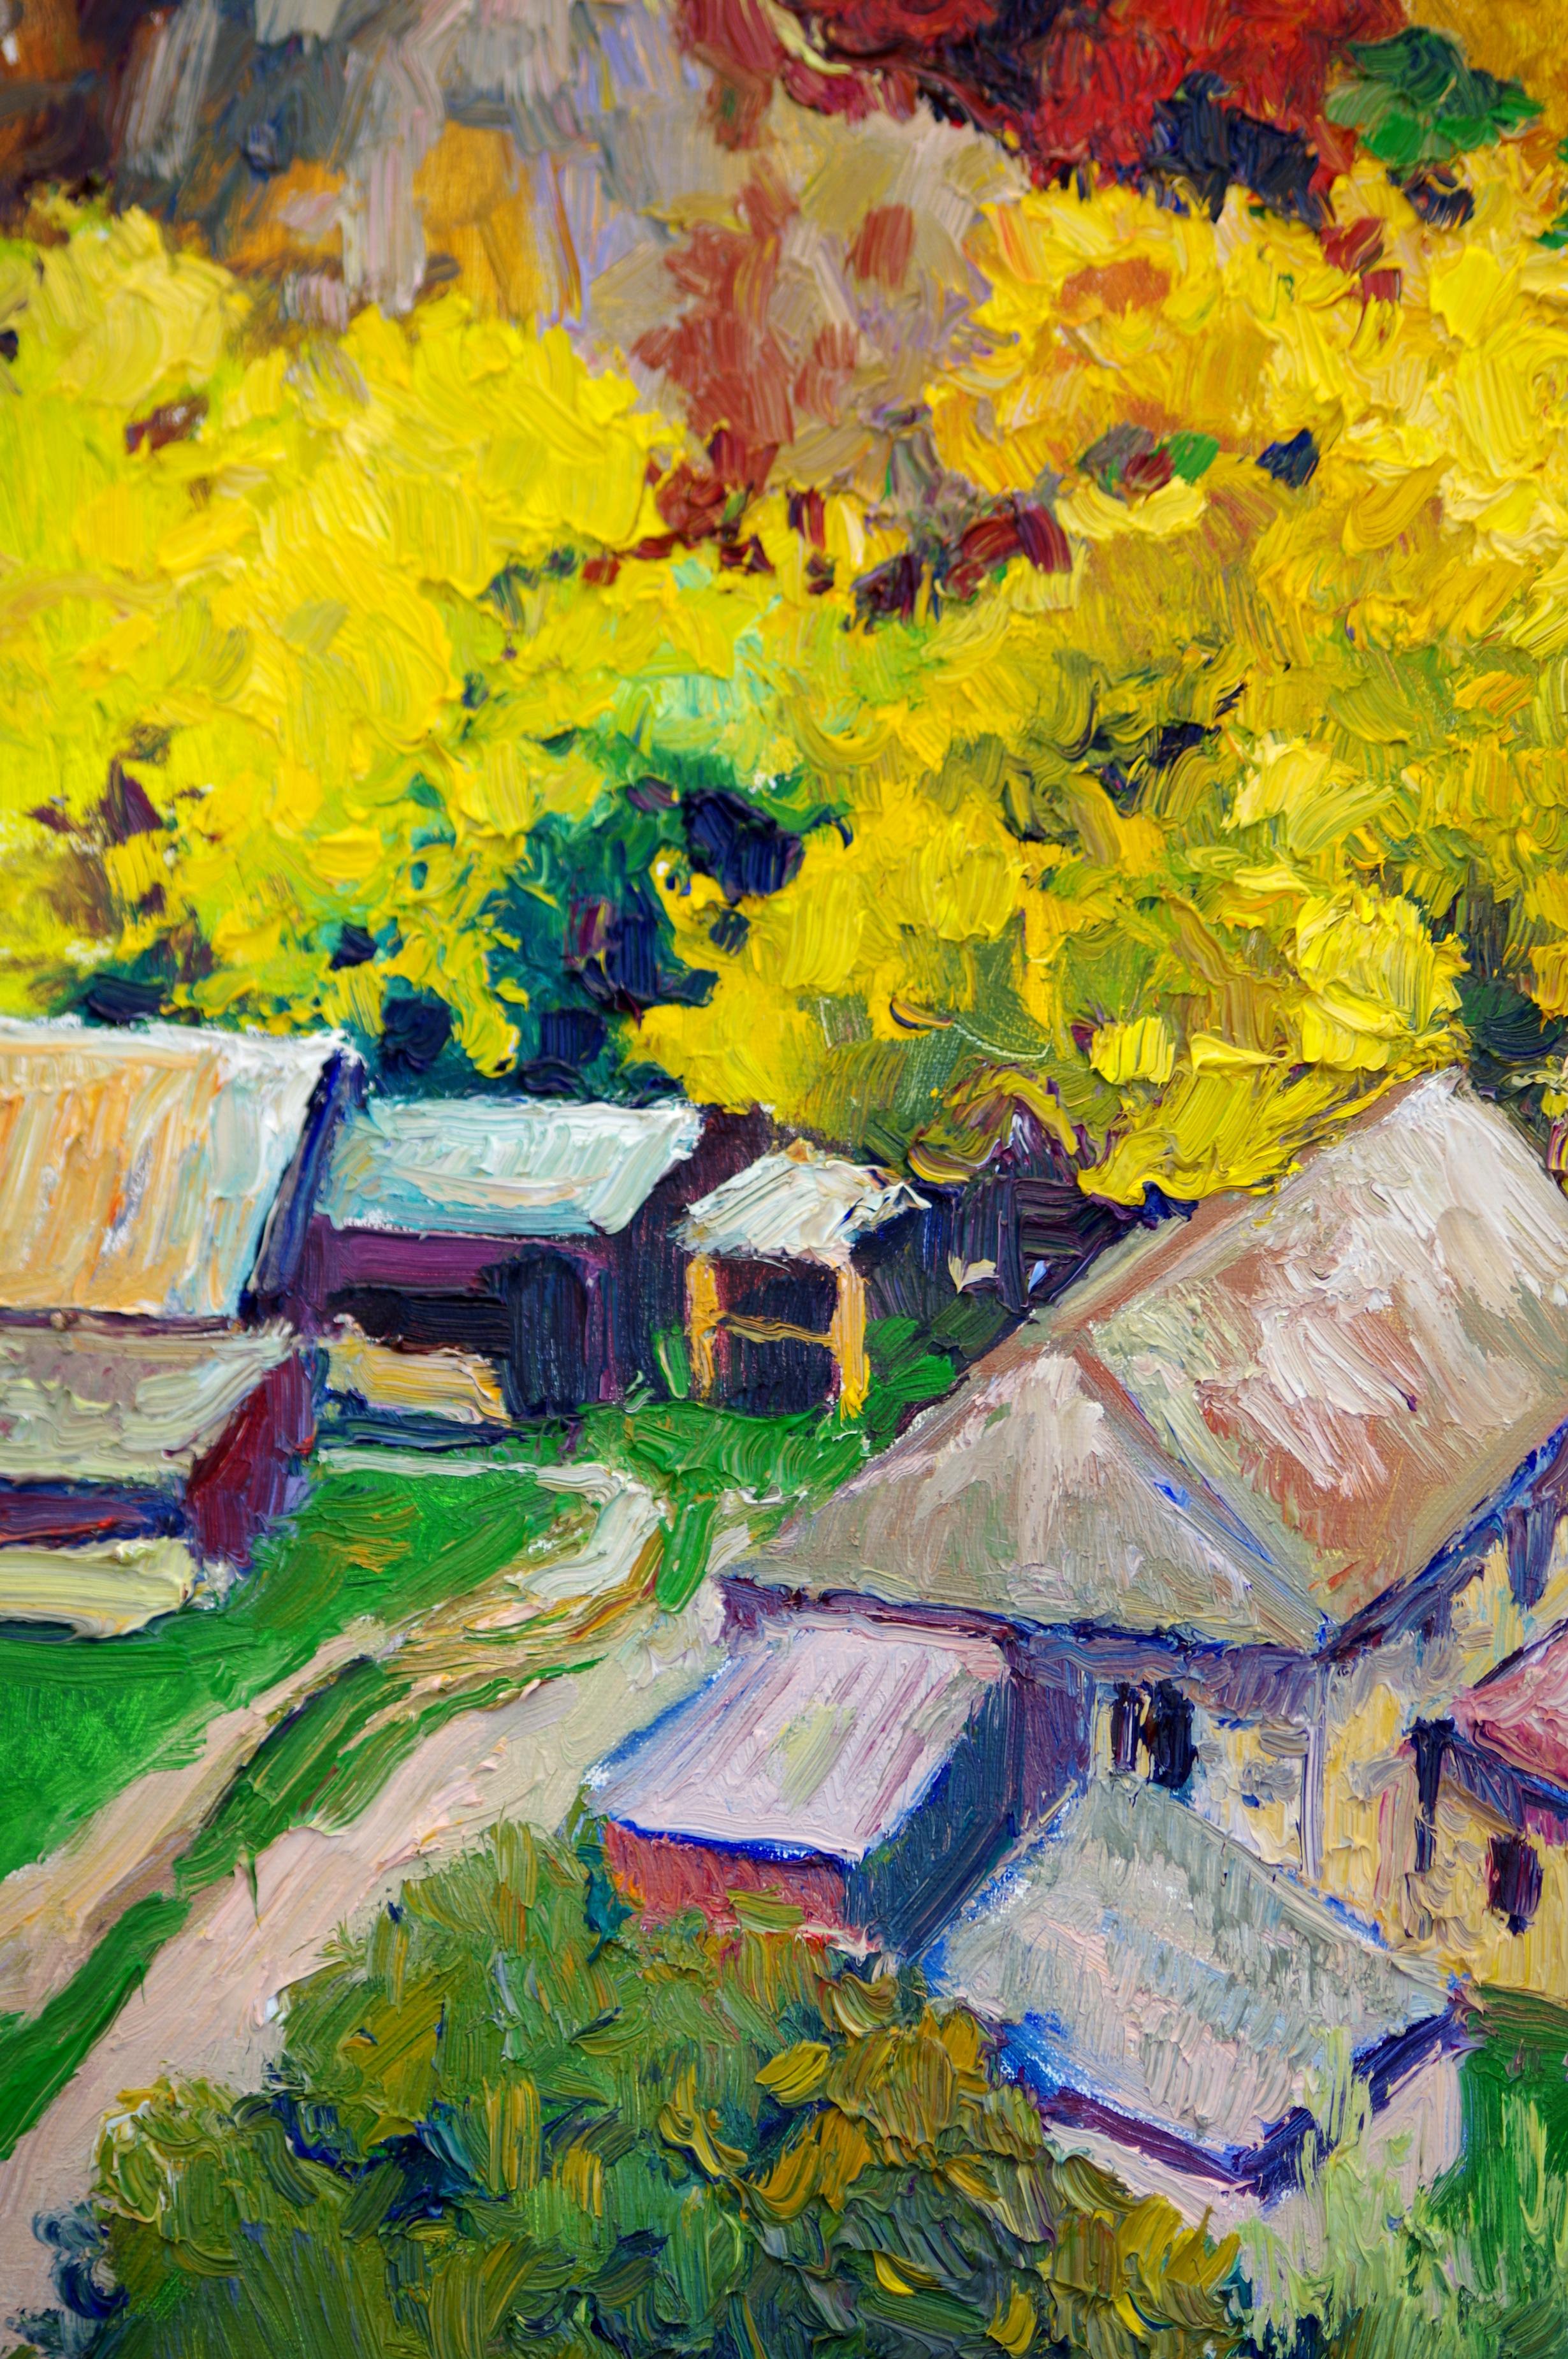 <p>Artist Comments<br />Farmhouses surrounded by an early autumn landscape. Brilliant yellow, red and orange nicely contrast the still green foliage. Unique top down viewpoint and angled composition. Painting abstracts as the scene recedes into the